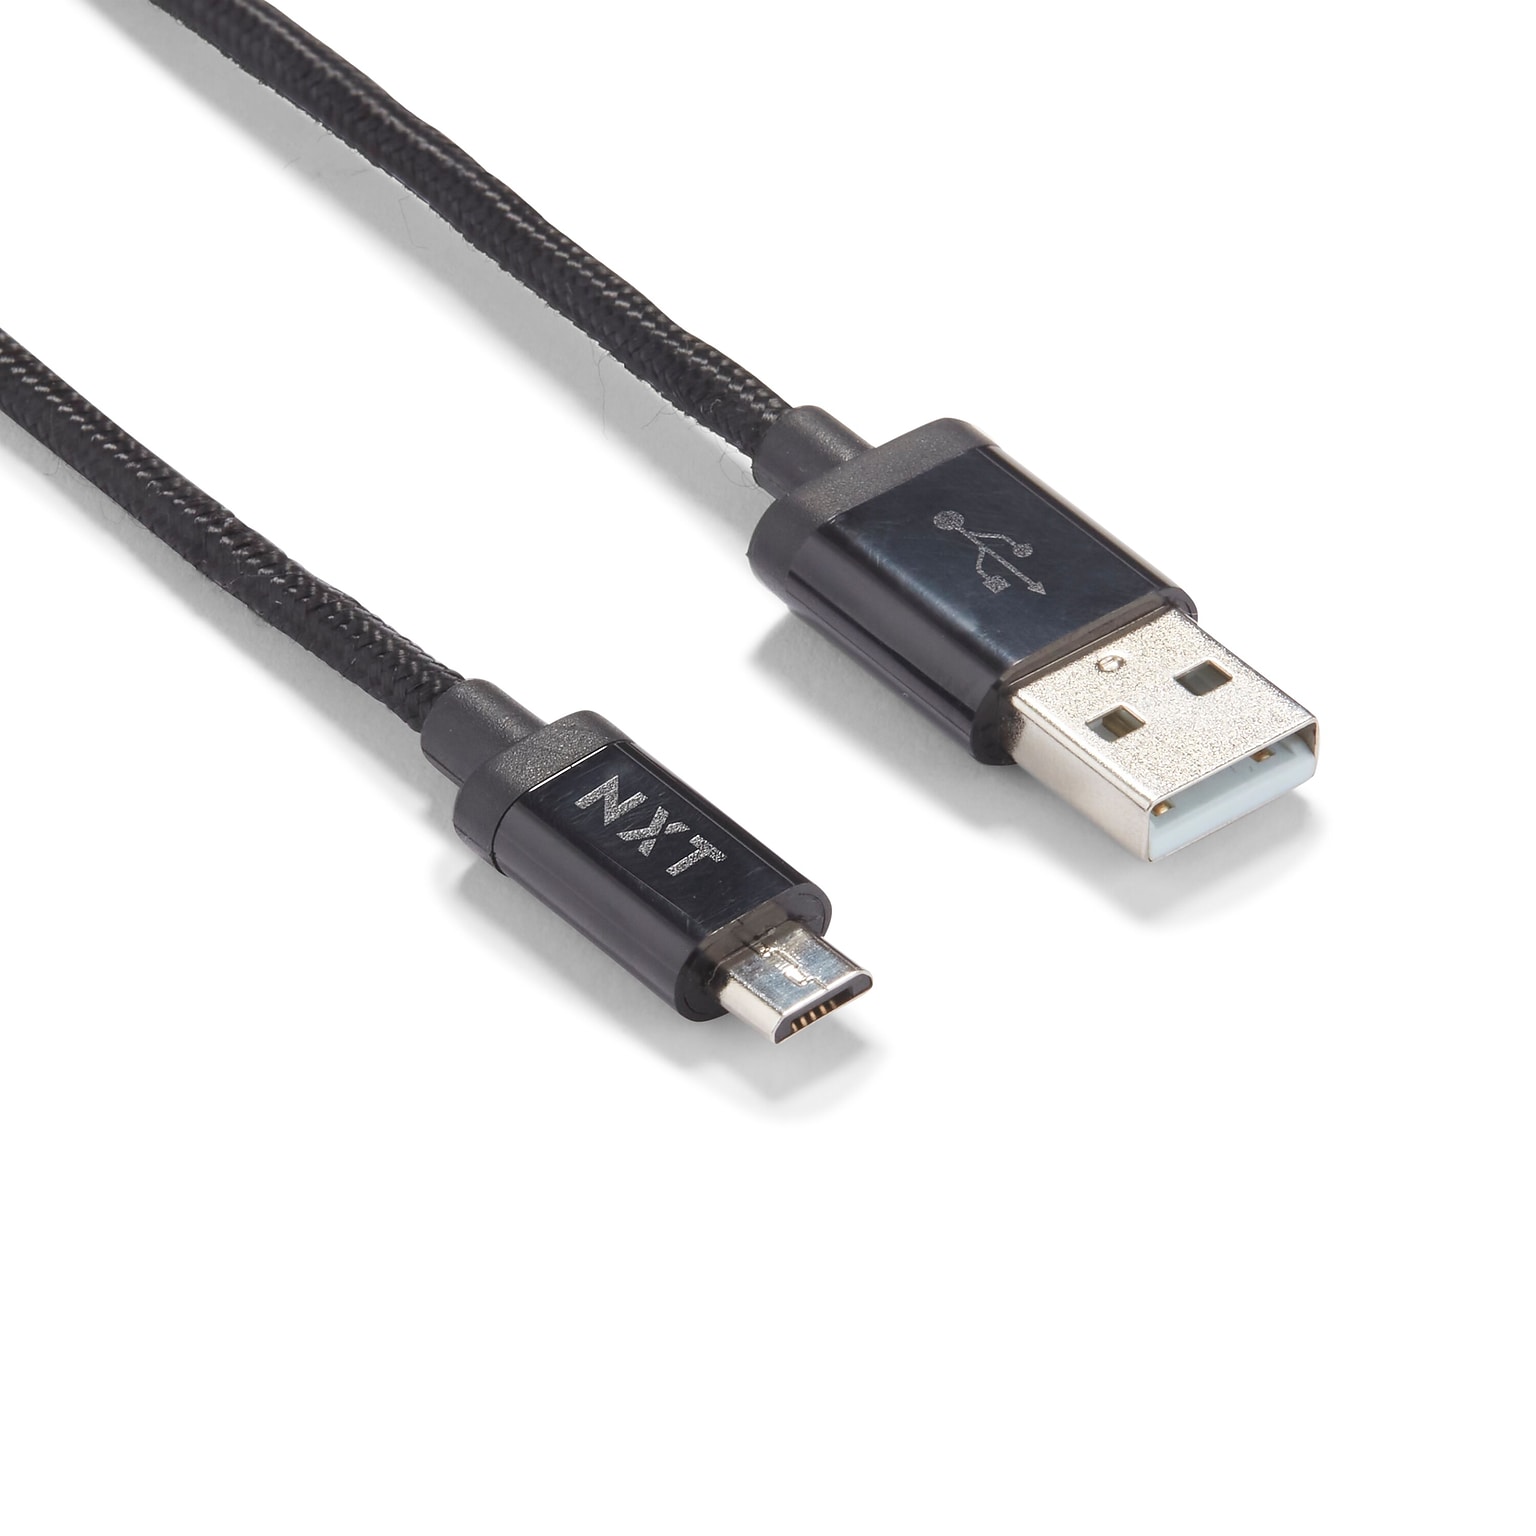 NXT Technologies 4 Ft. Braided USB-A to Micro-USB Charging Cable for Samsung/Android, Black (NX54334)